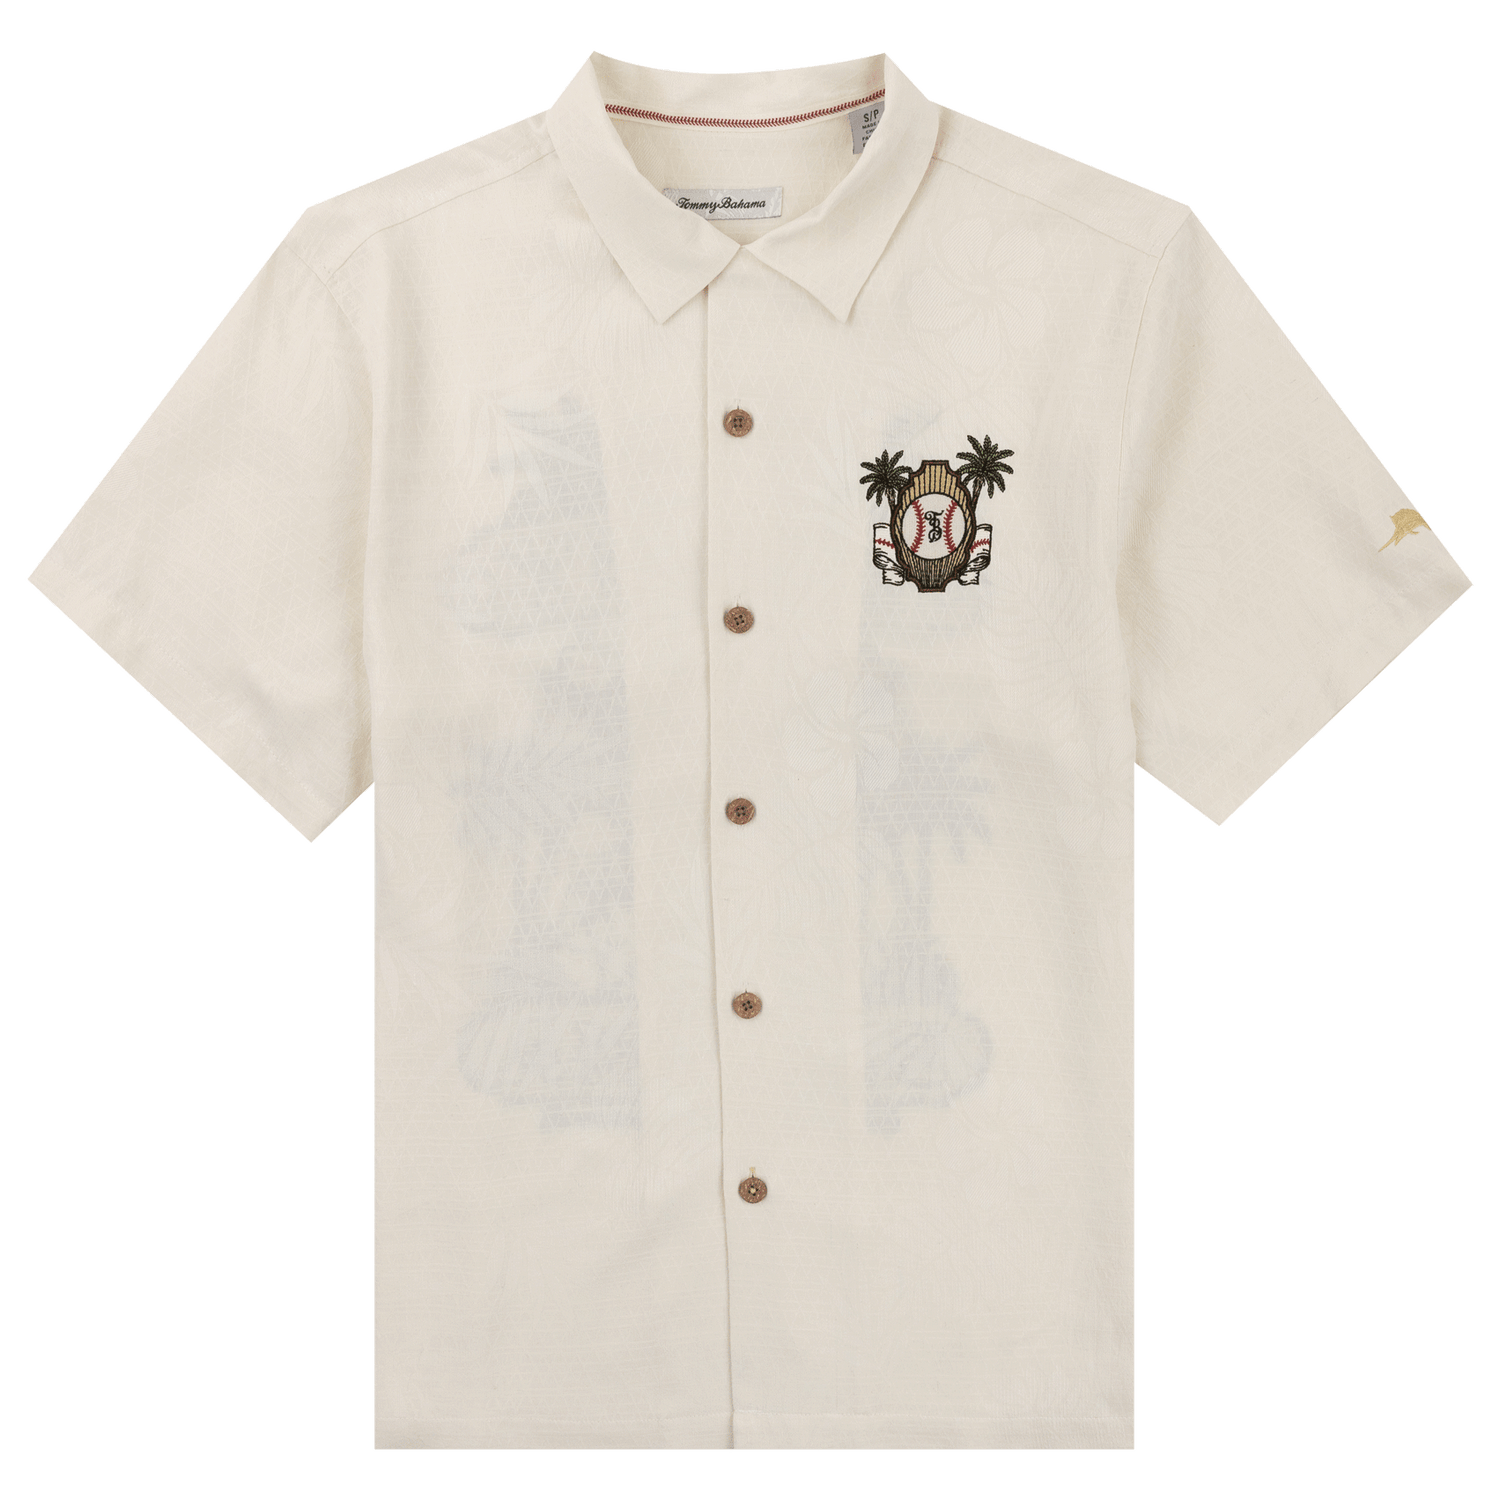 Texas A&M Tommy Bahama Pitchers Paradiso Button Down